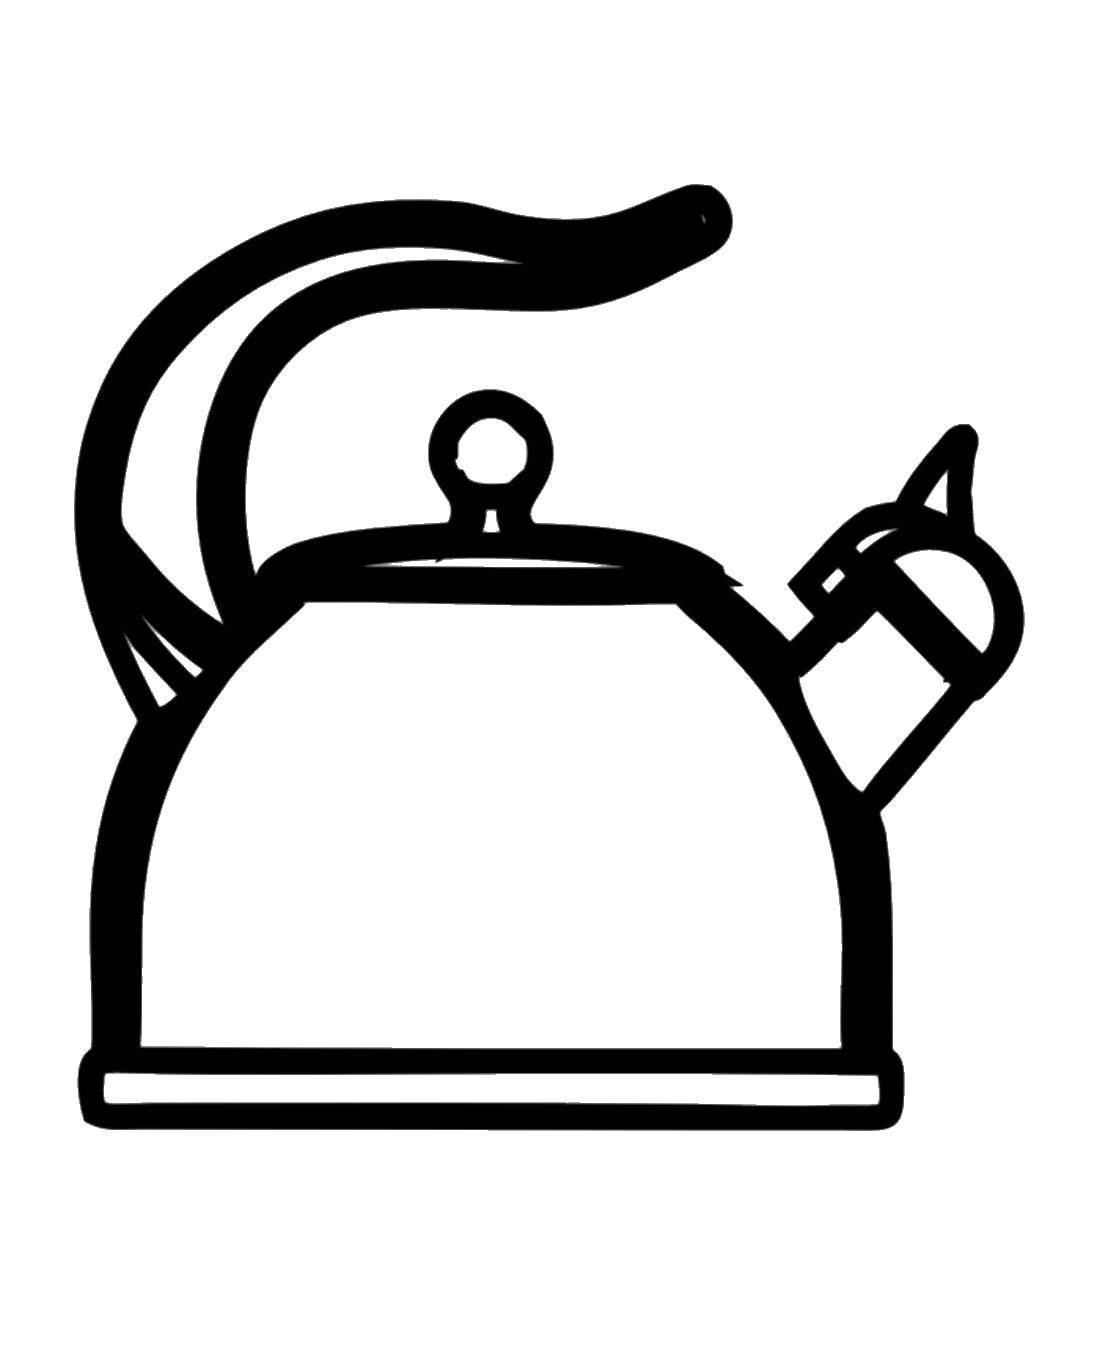 Coloring Kettle. Category kettle. Tags:  kettle, Cup.